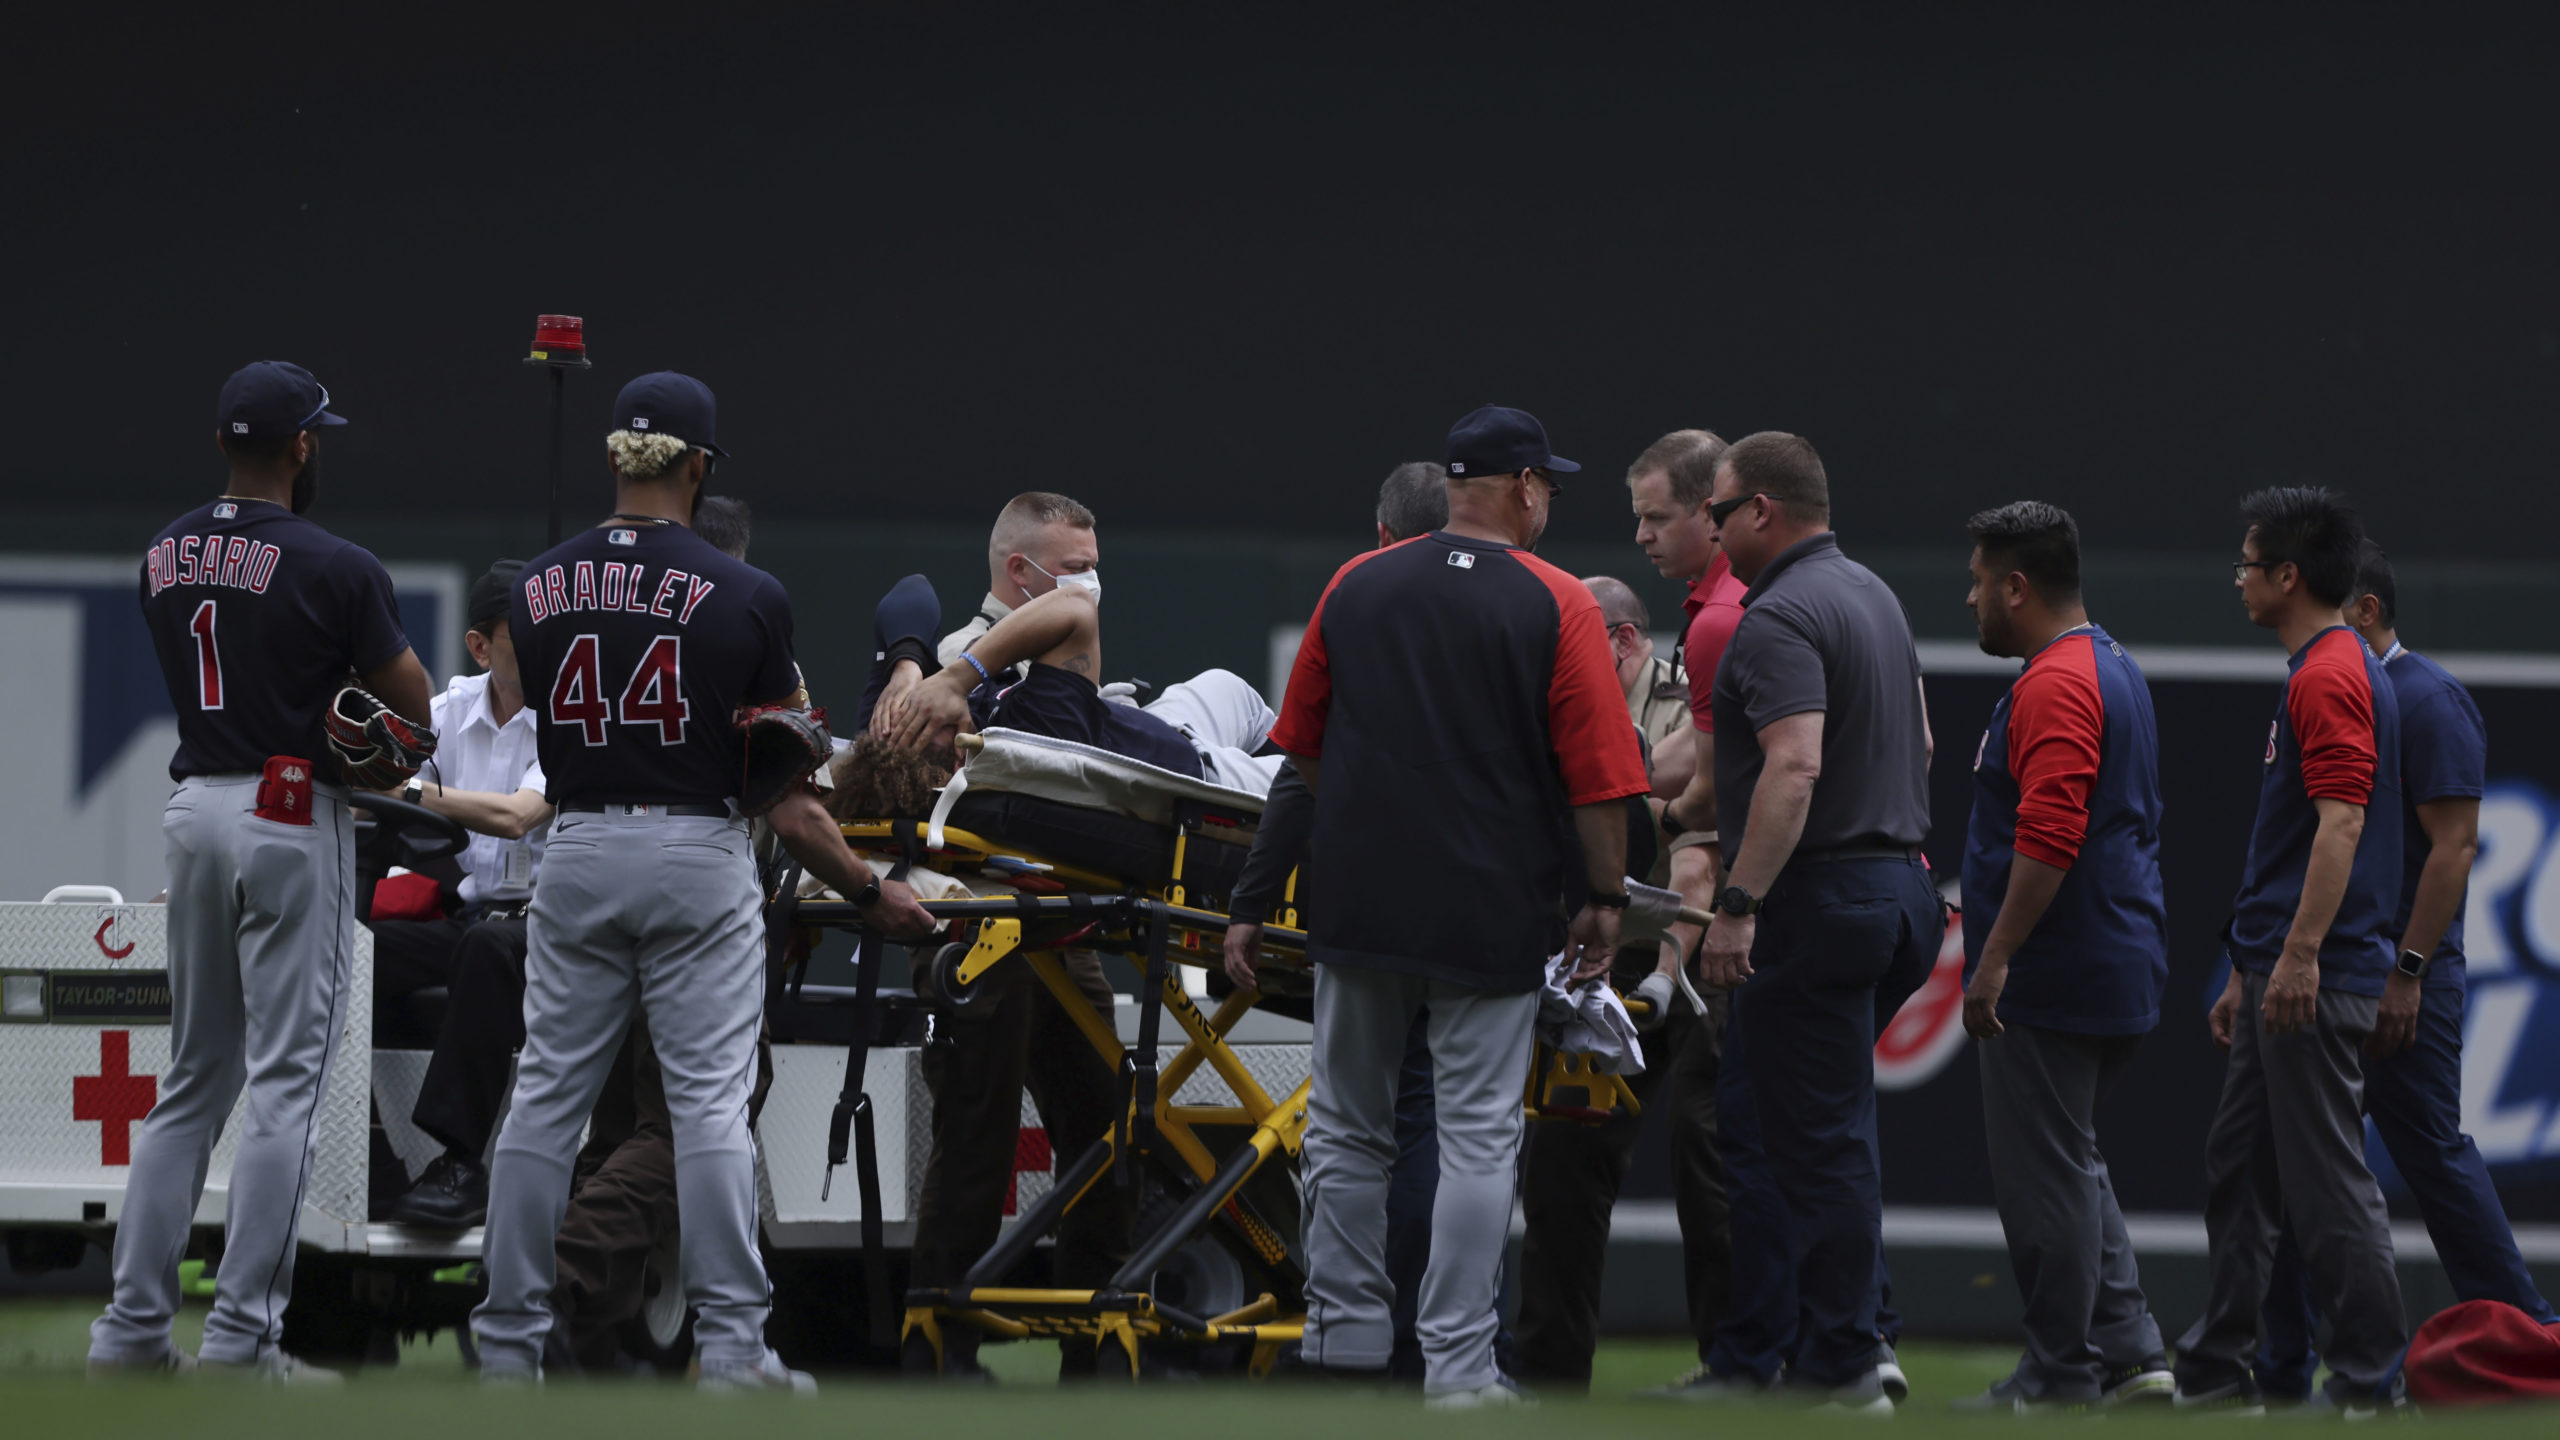 Indians OF Naylor injured in scary collision, Twins win 8-2